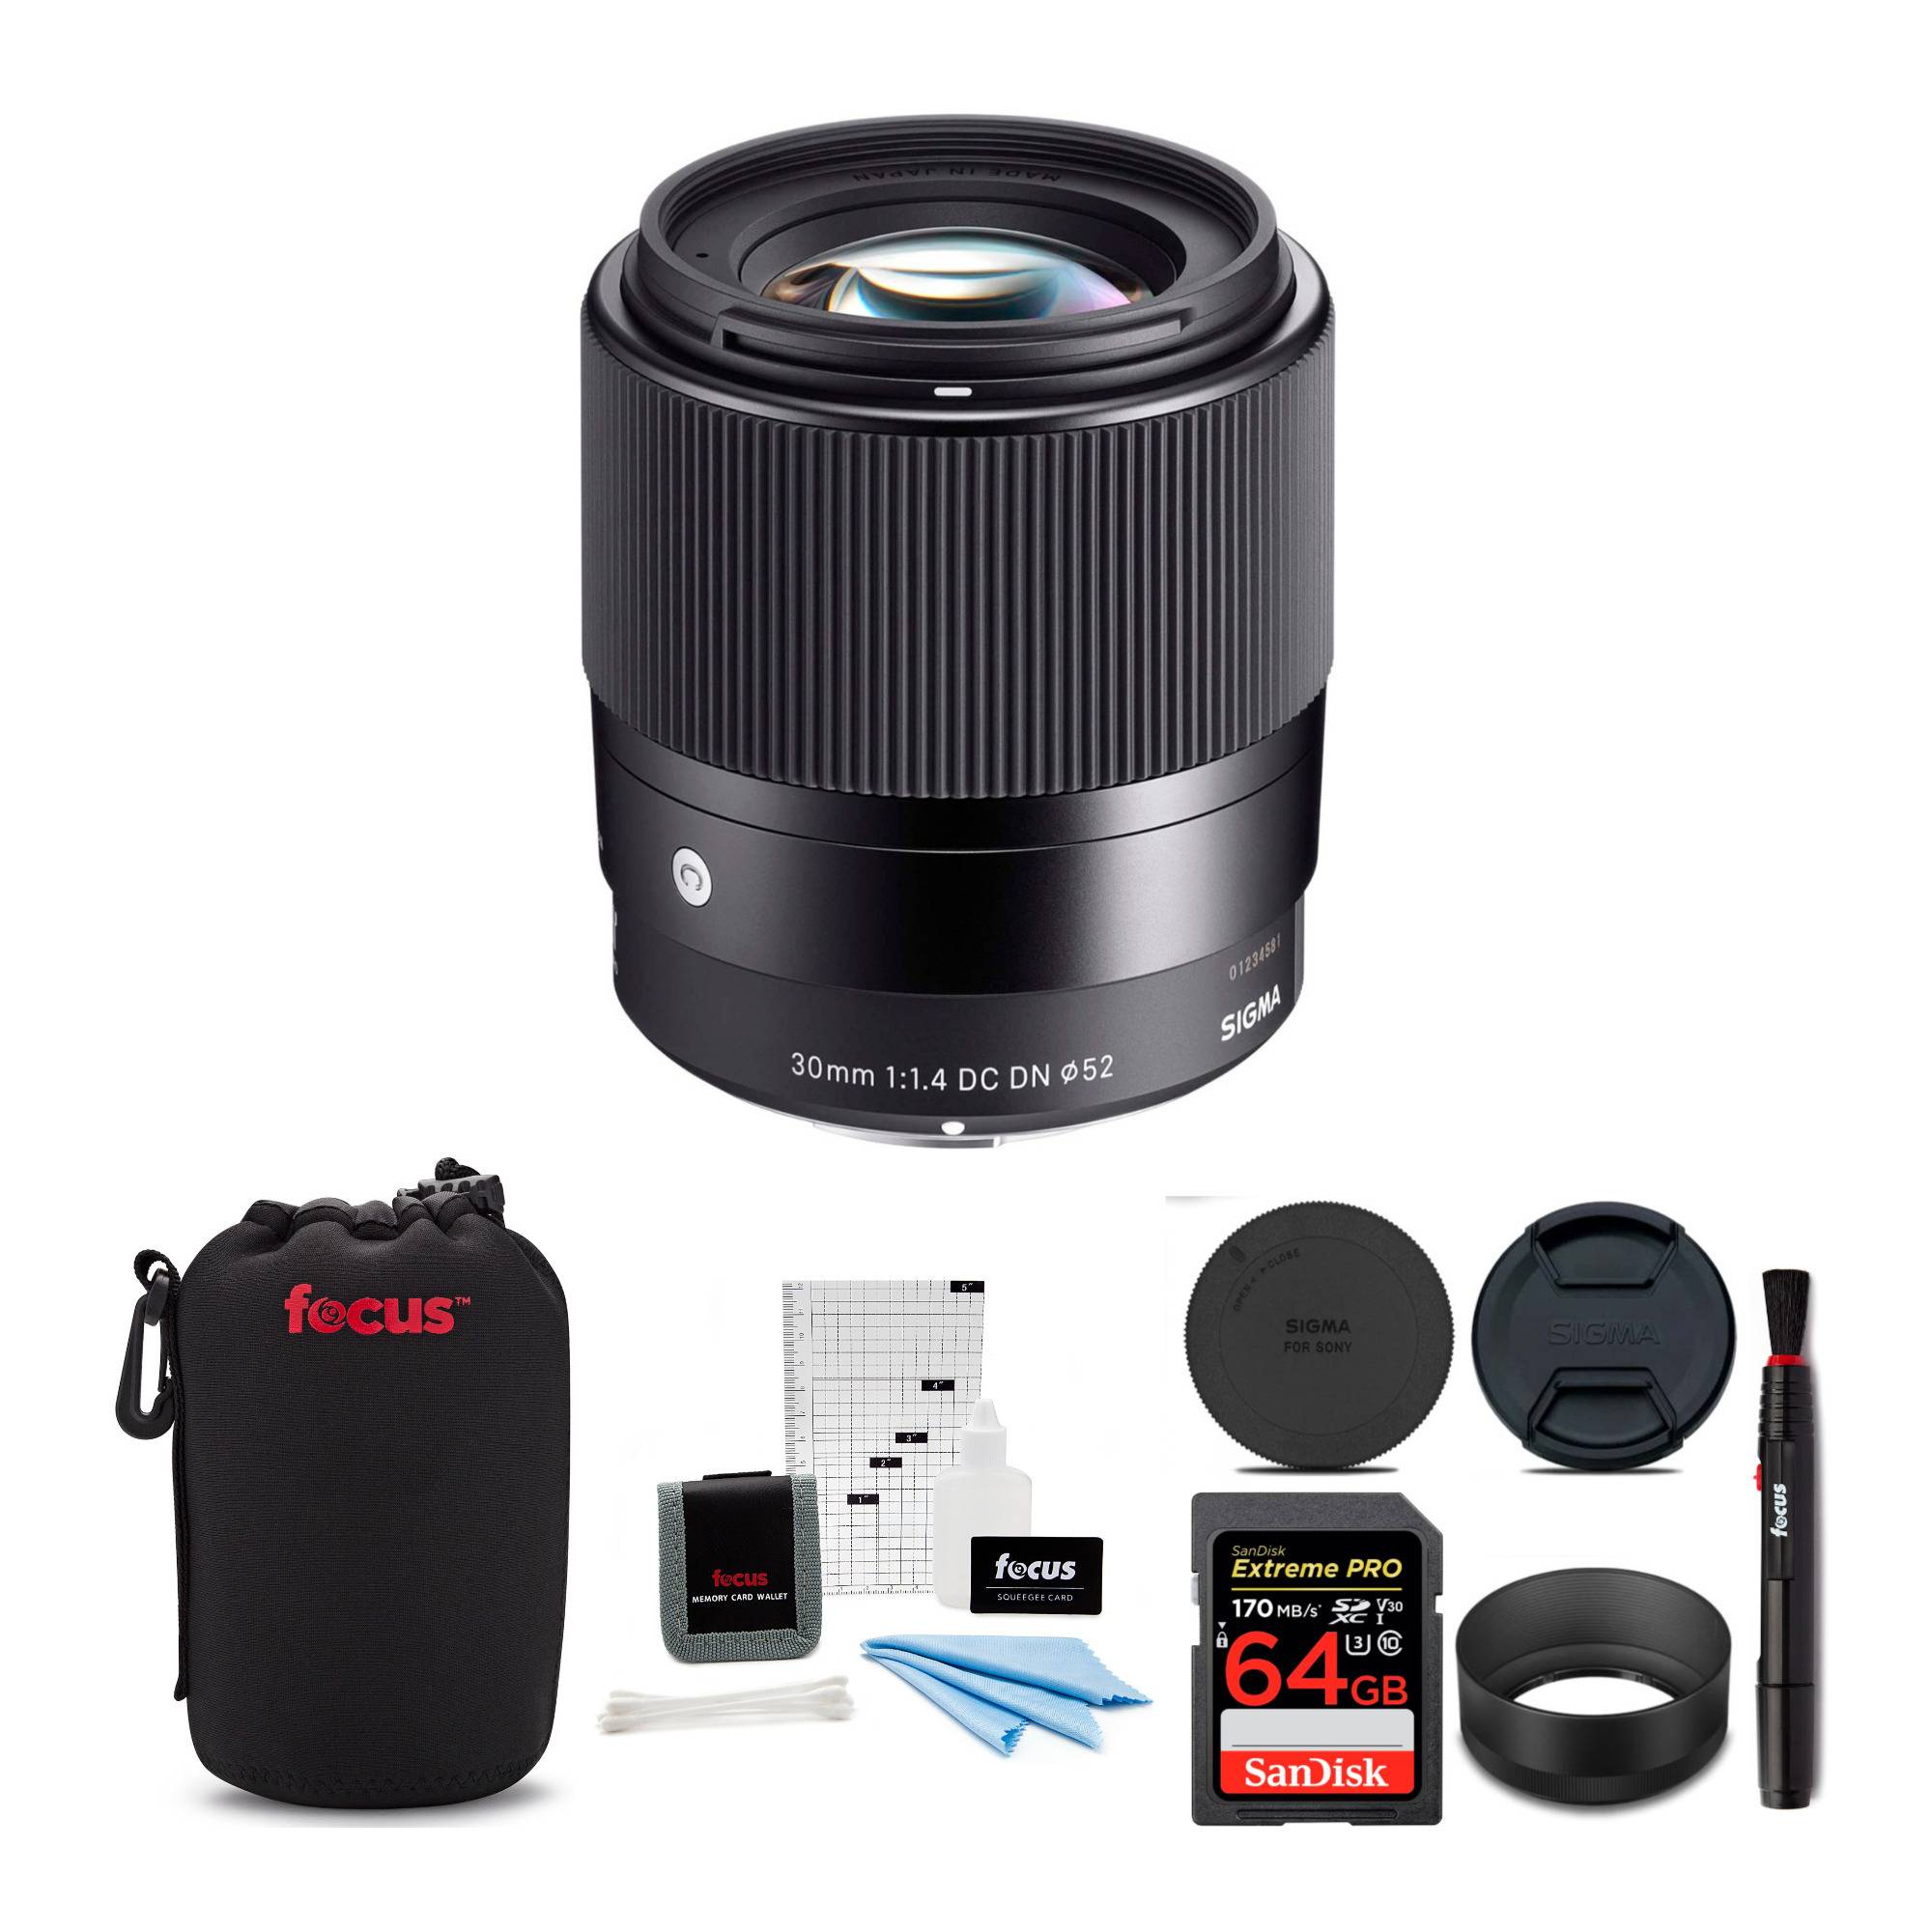 Sigma 30mm f/1.4 DC DN Contemporary Prime Lens for Sony E-Mount with 64GB Card and Accessory Bundle